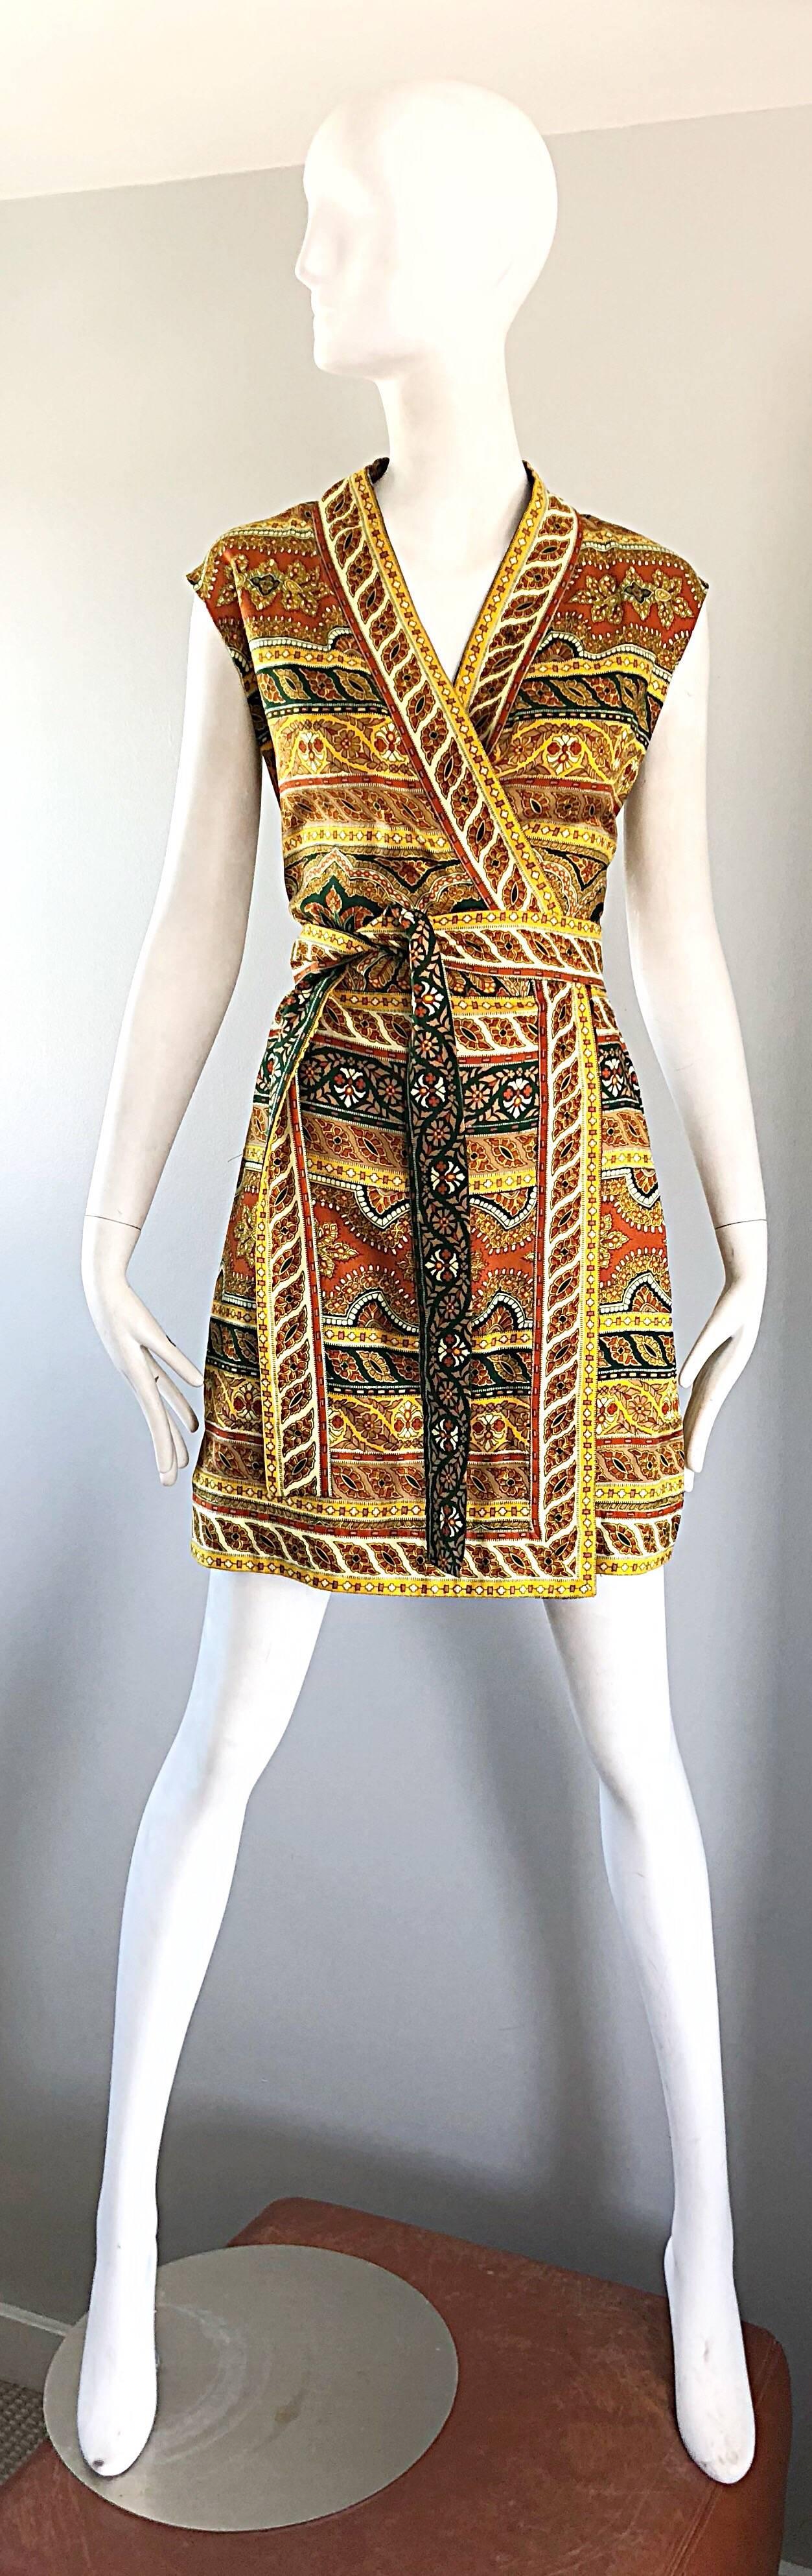 Chic 1960s DONALD BROOKS batik ethnic silk sleeveless wrap boho dress and sash belt! I love the quality and construction of Donald Brooks pieces. He was one of my favorite designers of the 60s and 70s. This rare gem features vibrant warm hues of